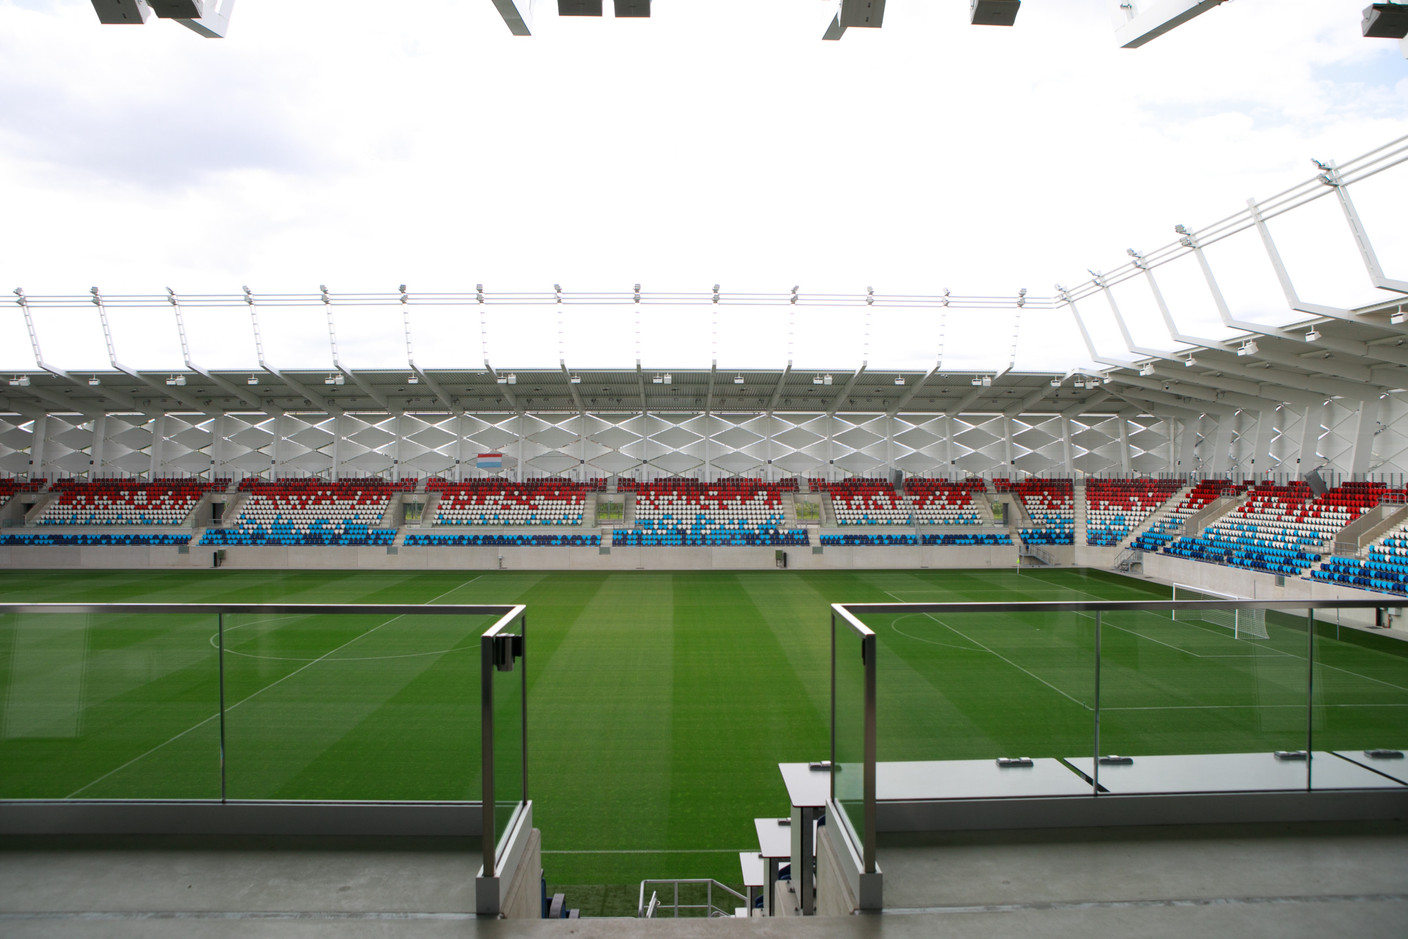 The Stade de Luxembourg is equipped with 540 business seats.  Photo: Matic Zorman / Maison Moderne